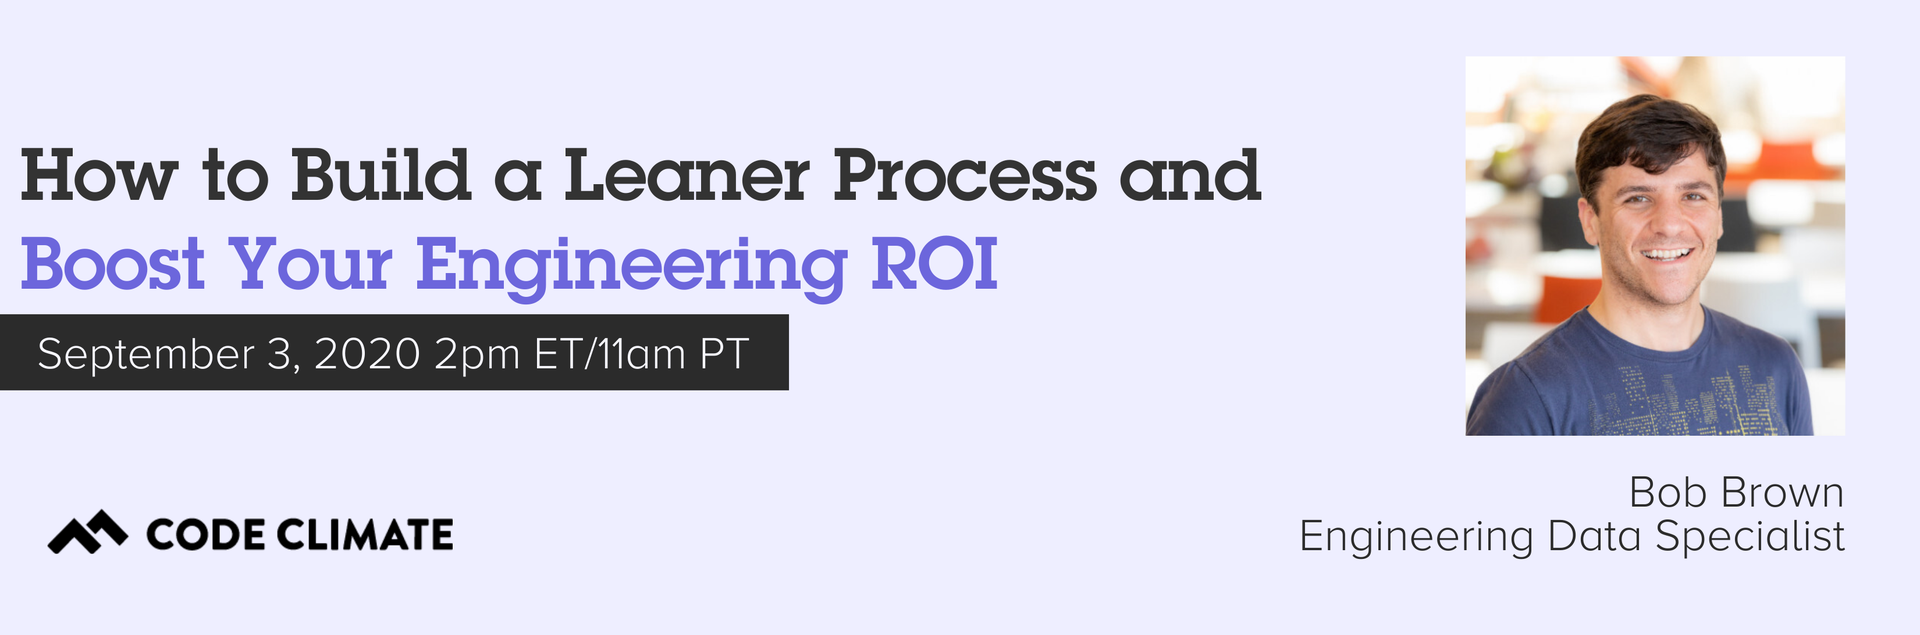 Join us for a free, 45-minute live webinar with Code Climate Data 
Specialist Bob Brown on Thursday, September 3rd at 2pm (EDT), as we discuss 
how leaders use data to to build a leaner process at scale and get the 
intended ROI from their engineering organization.